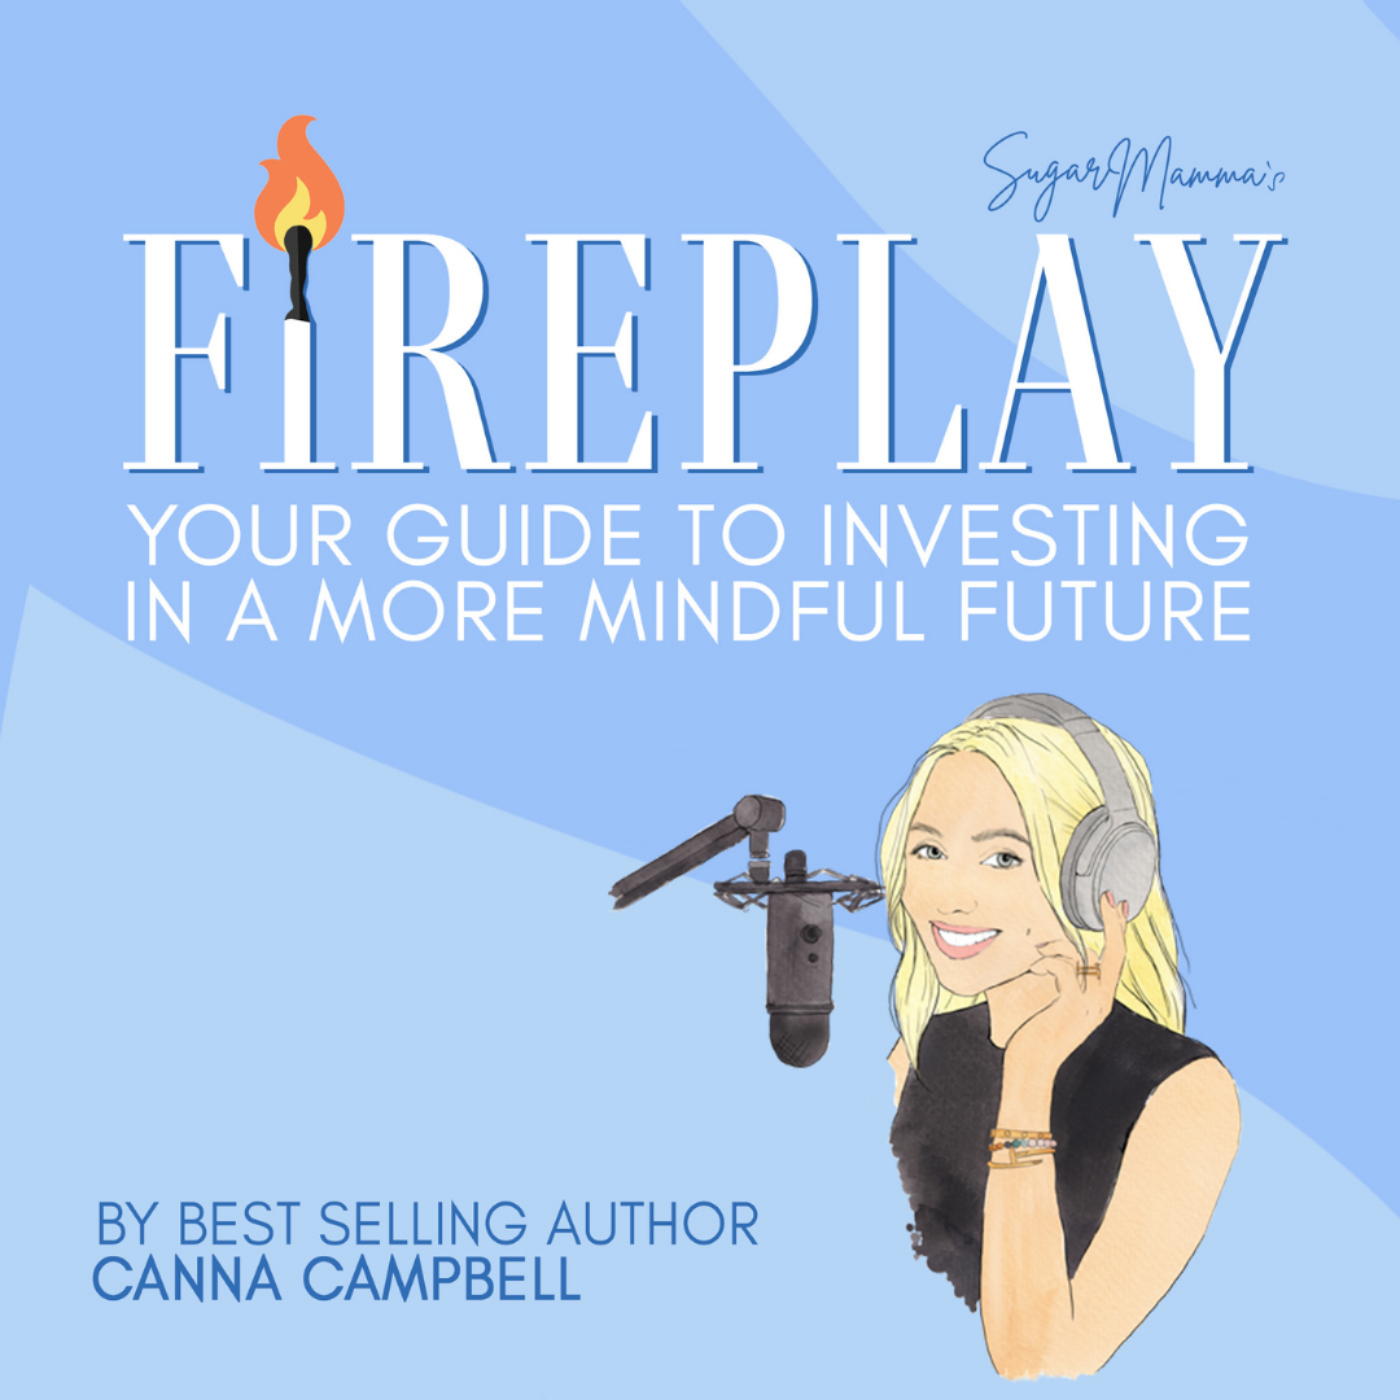 Finding your financial inspiration - chatting with Canna & Queenie